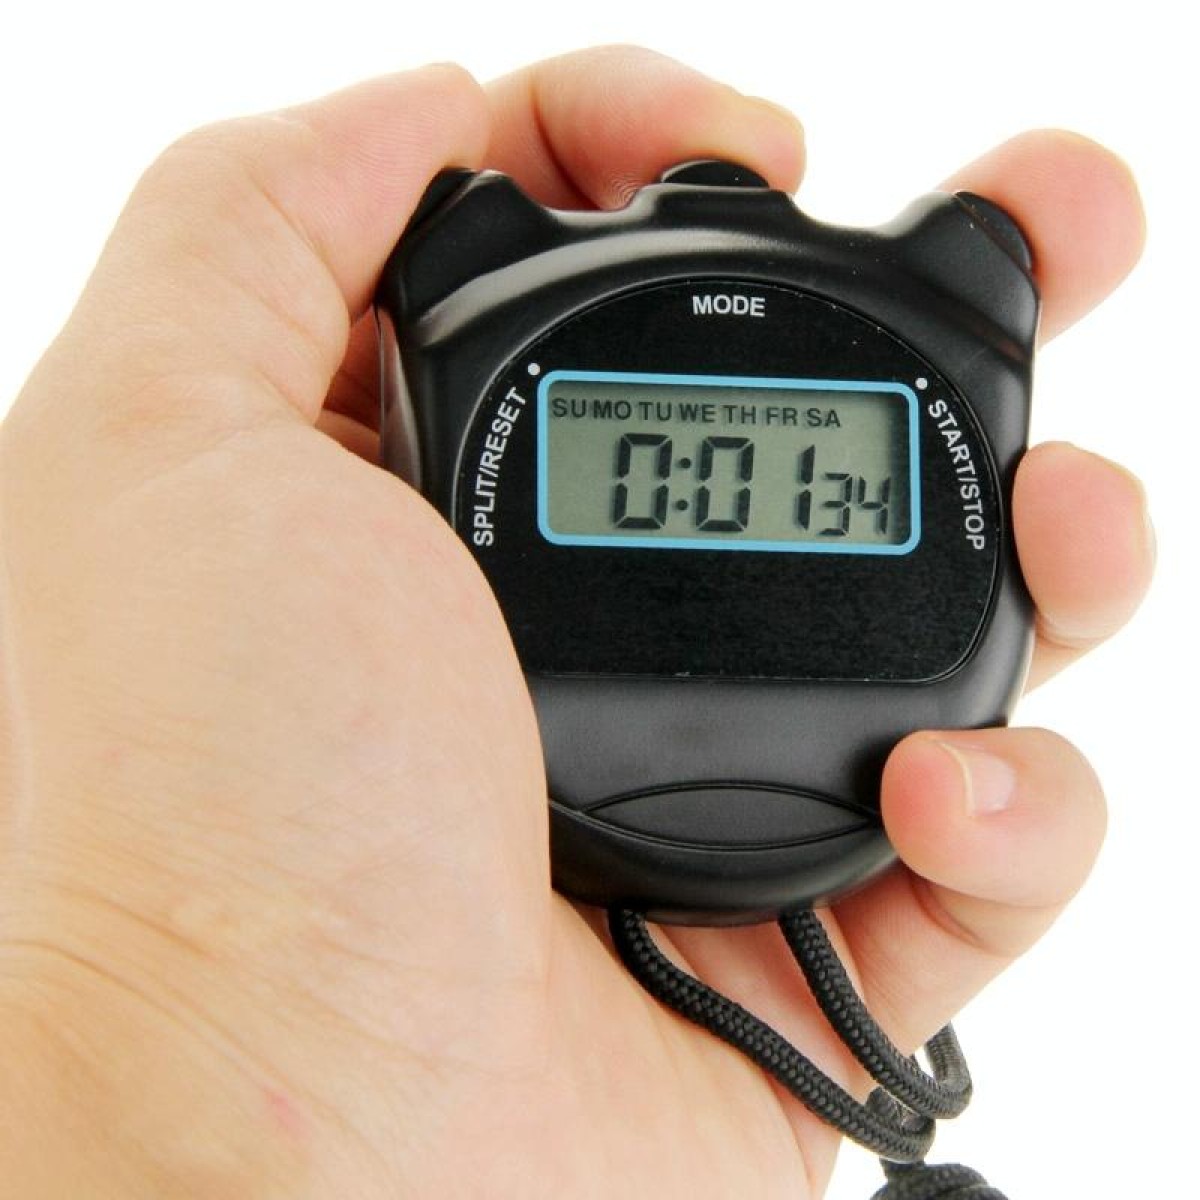 PS50 Stopwatch Professional Chronograph Handheld Digital LCD Sports Counter Timer with Strap